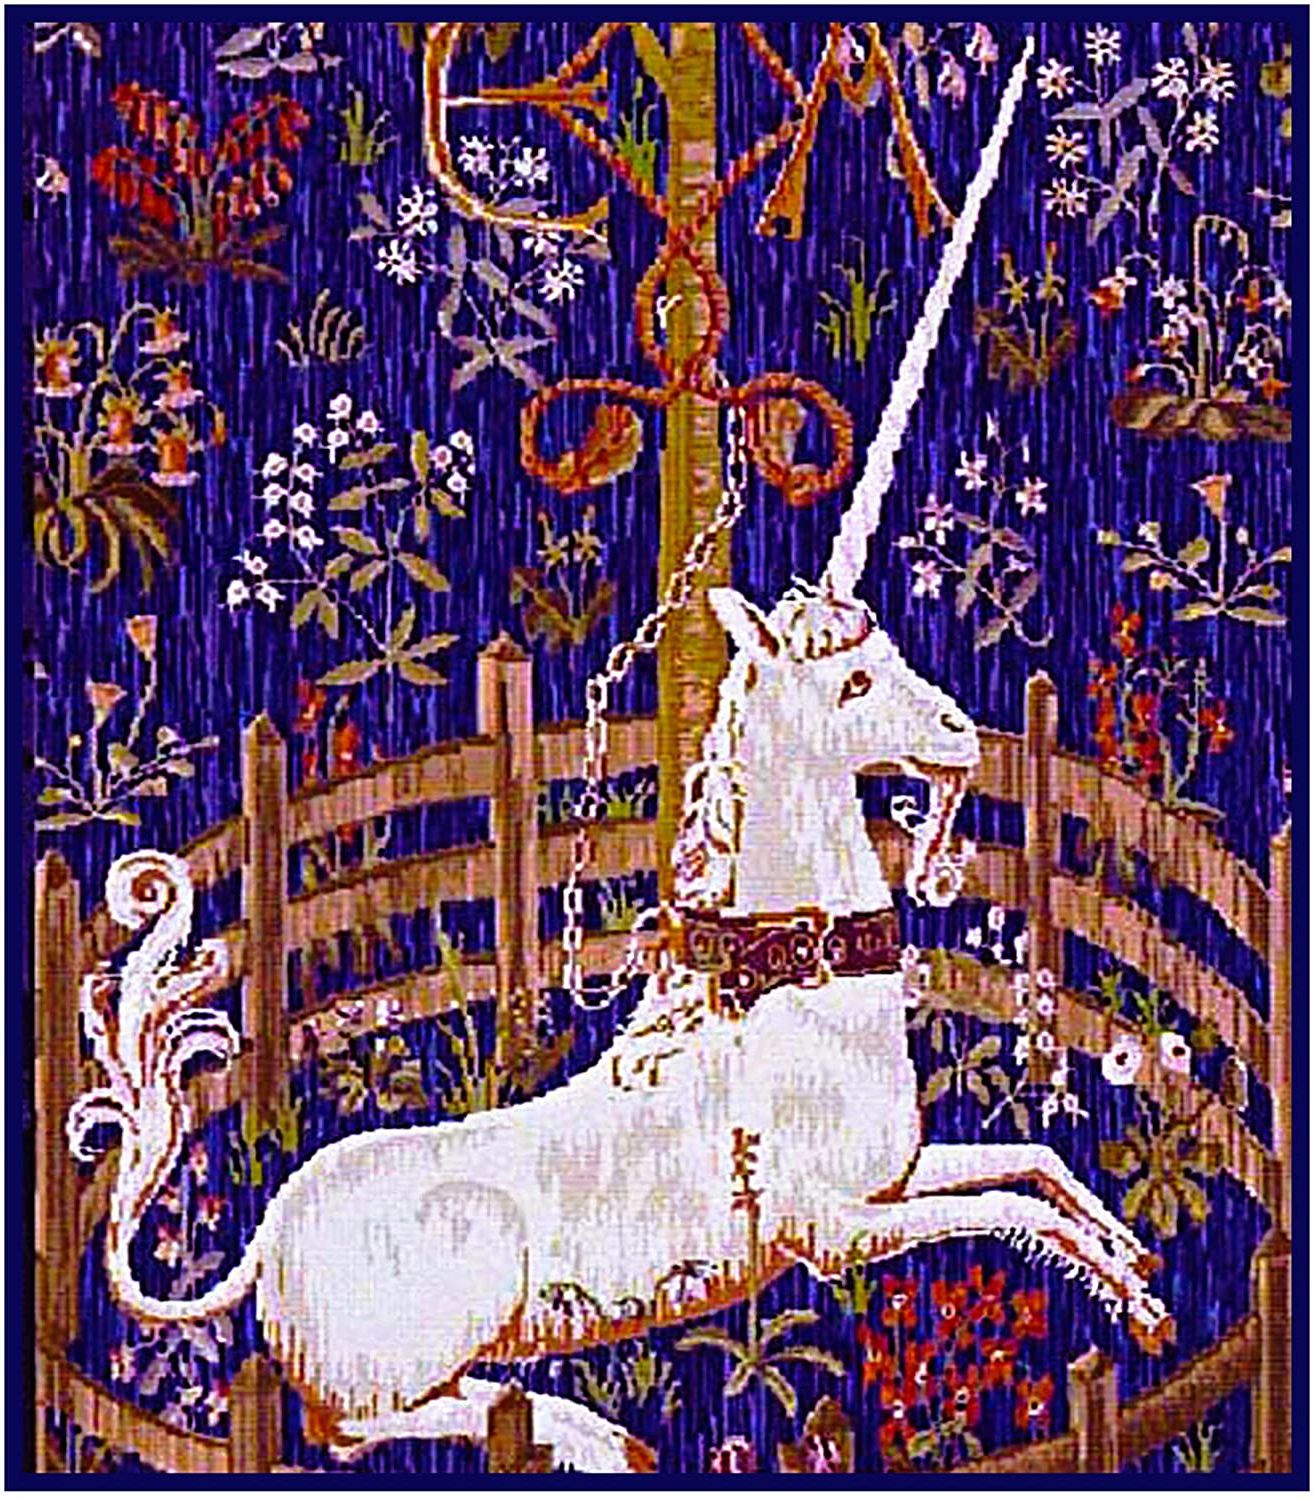 Blended Fabric Unicorn In Captivity Ii (with Border) Wall Hangings For Widely Used Amazon: Orenco Originals Unicorn In Captivity Antique (View 4 of 20)